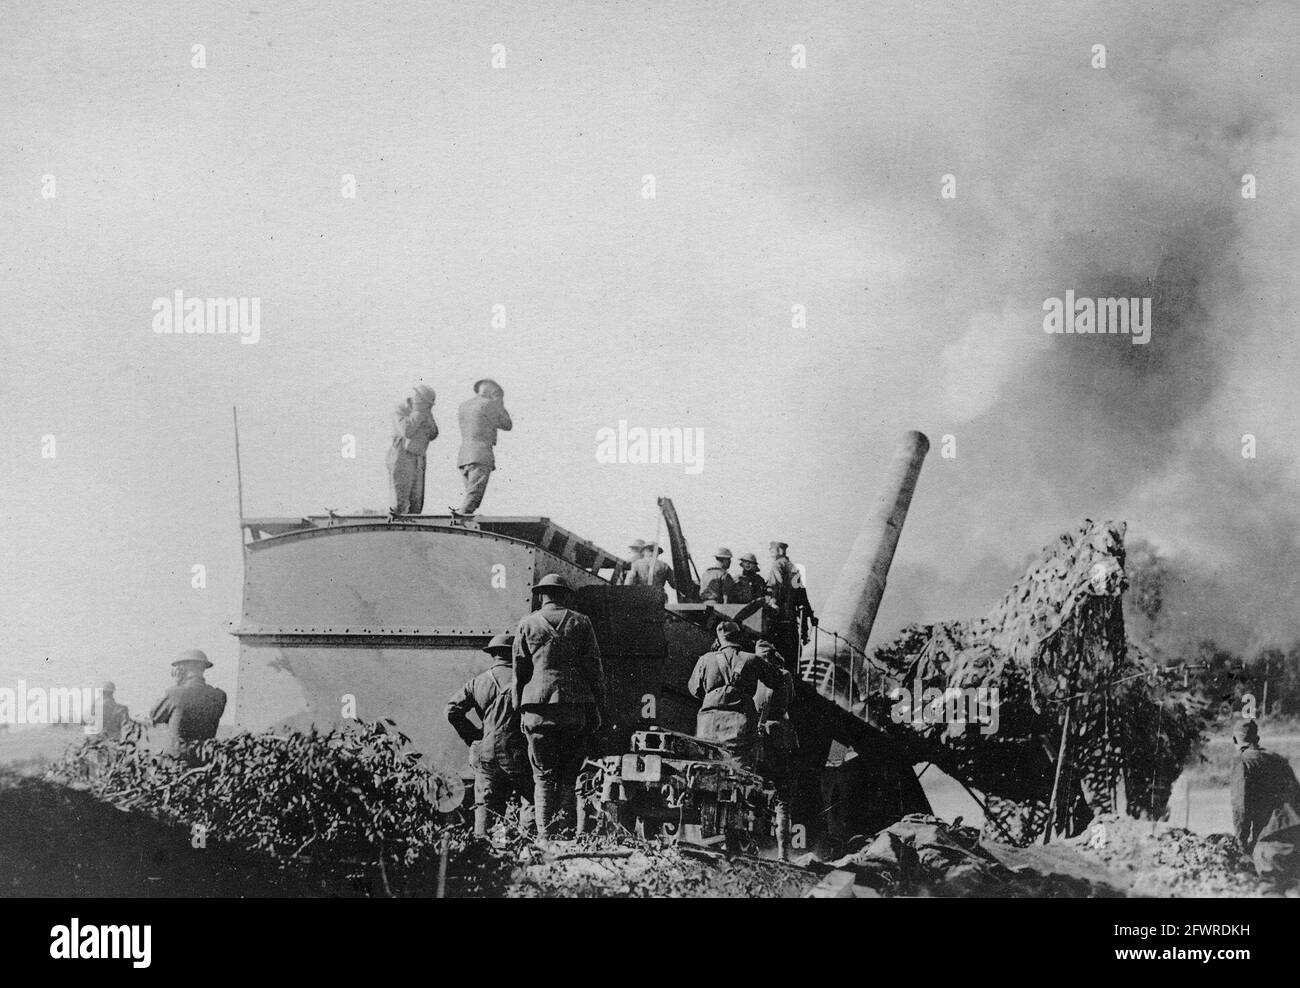 A railroad artillery gun, sending a 14 inch shell towards the enemy. These guns did much damage to the German lines of communication from 20 to 25 miles behind their lines. France, 1918. Stock Photo